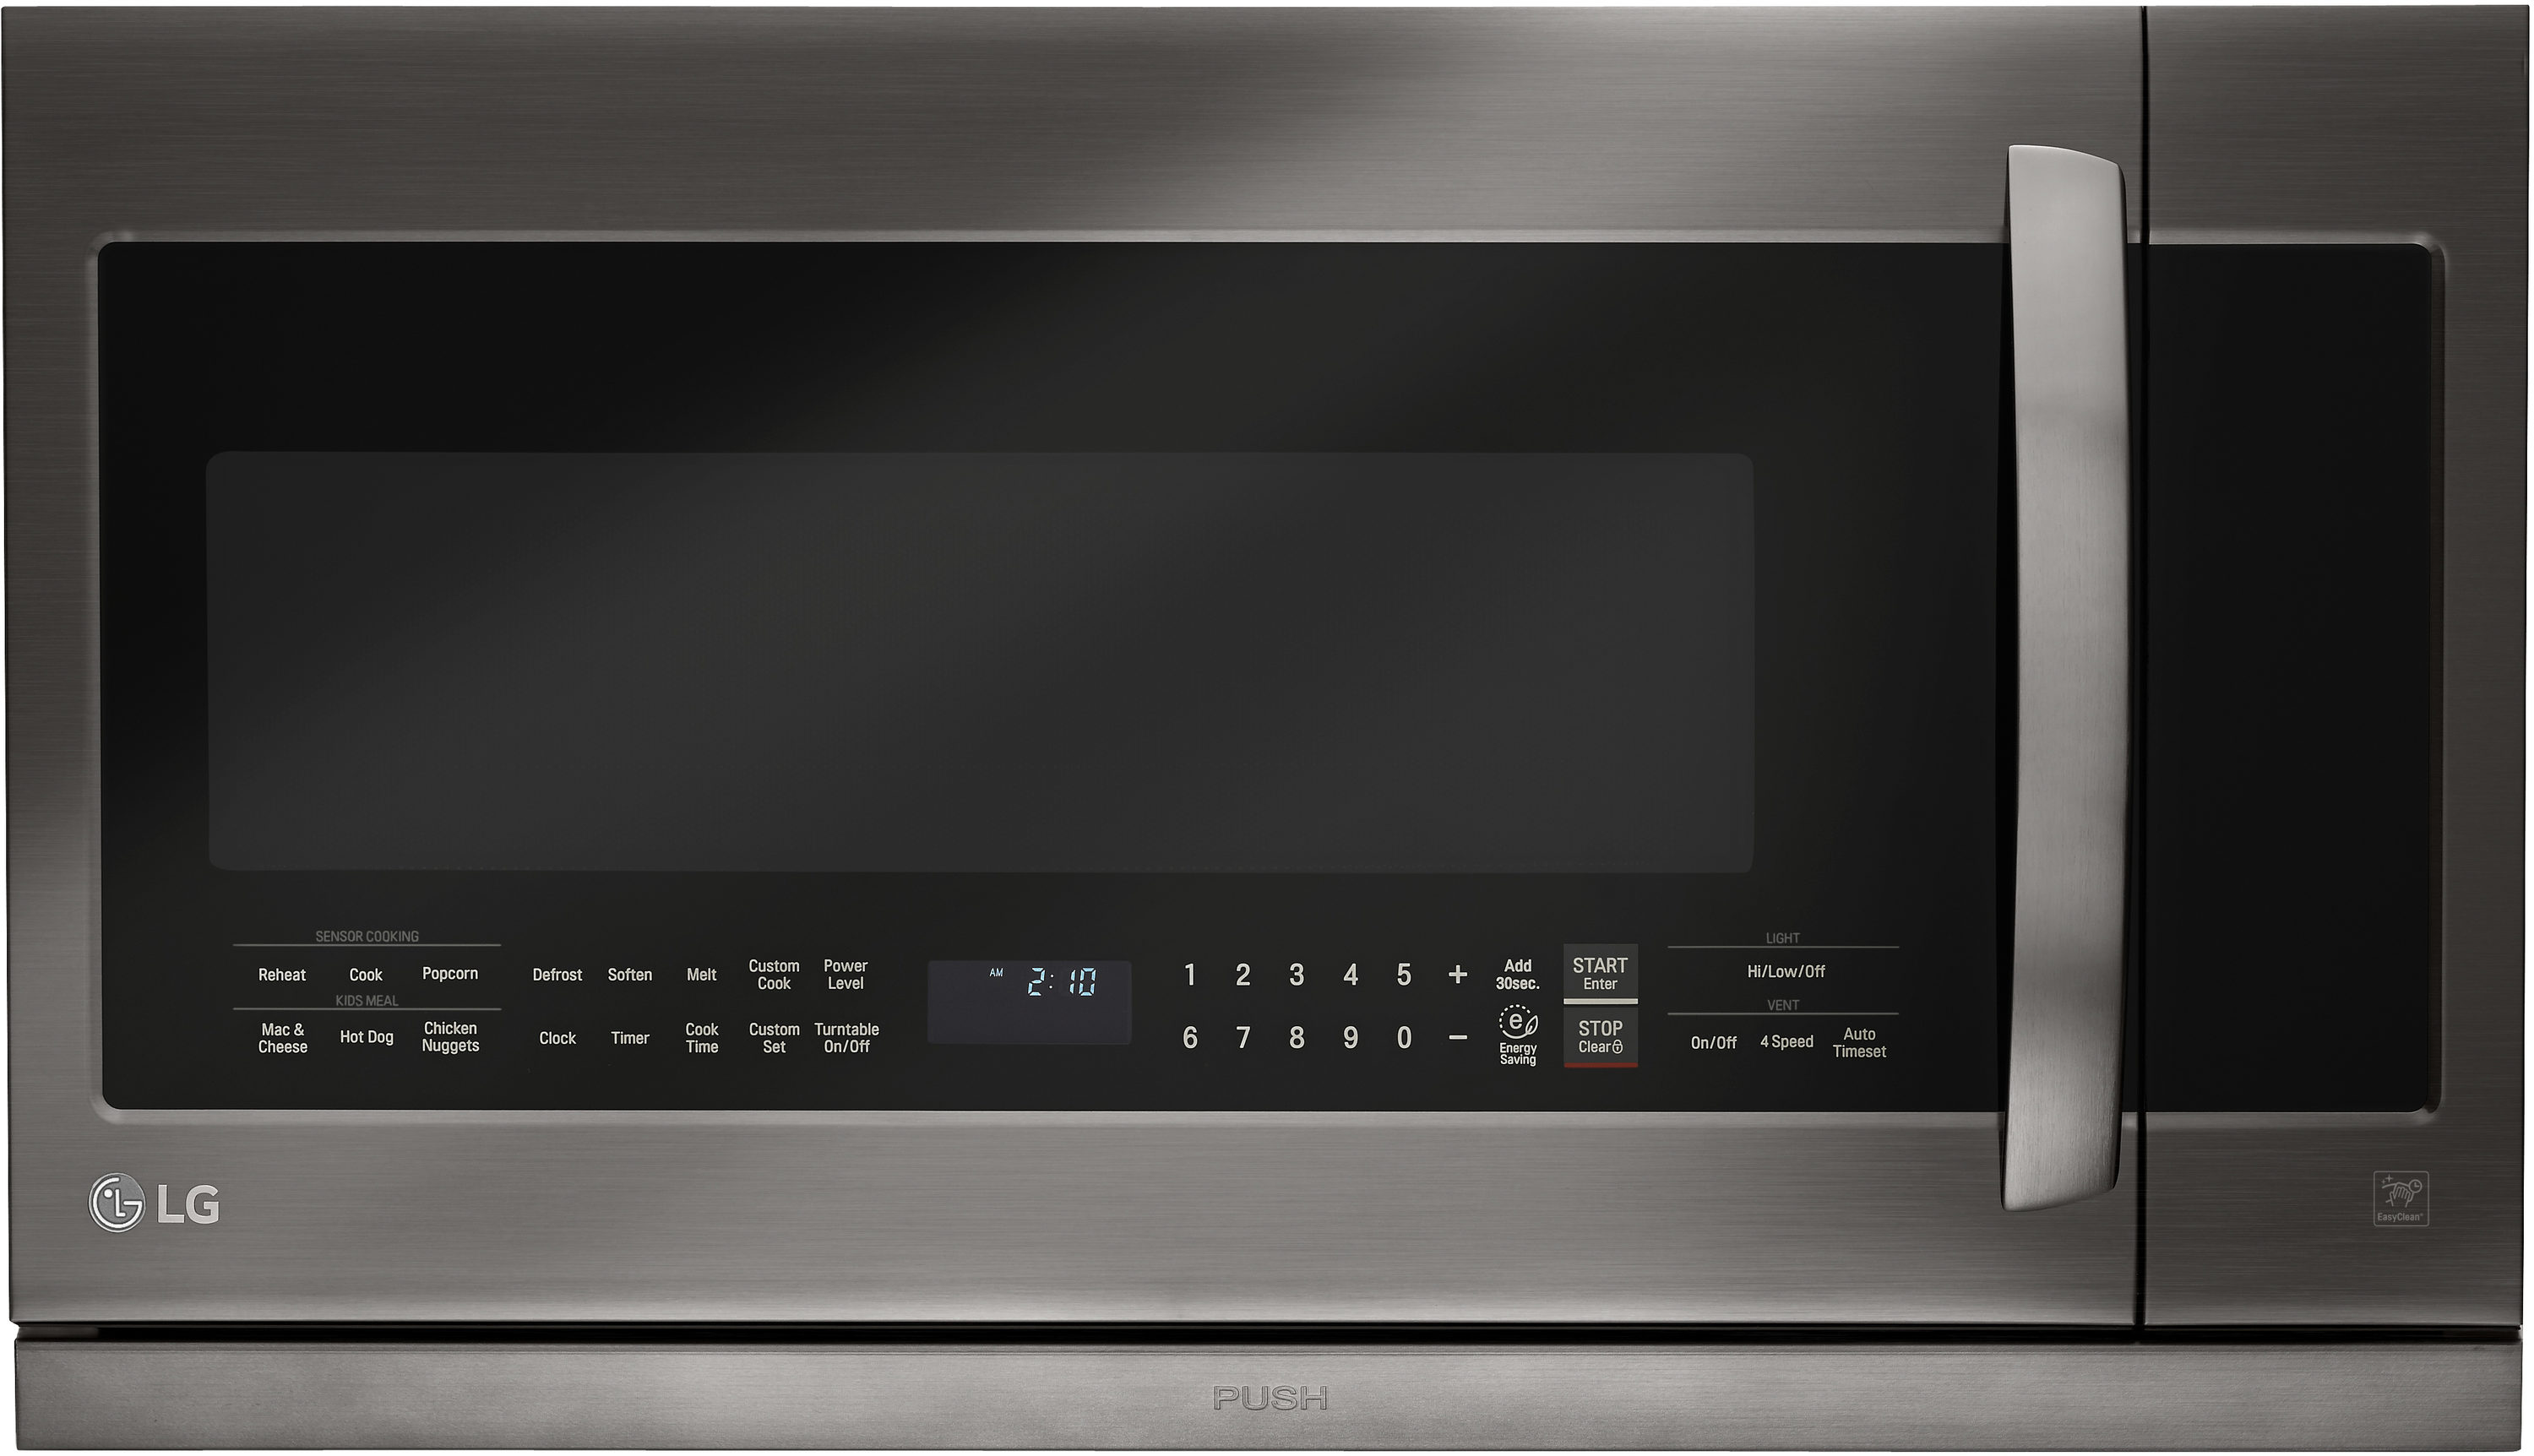 2.1 cu. ft. Over-the-Range Microwave with ExtendaVent® 2.0